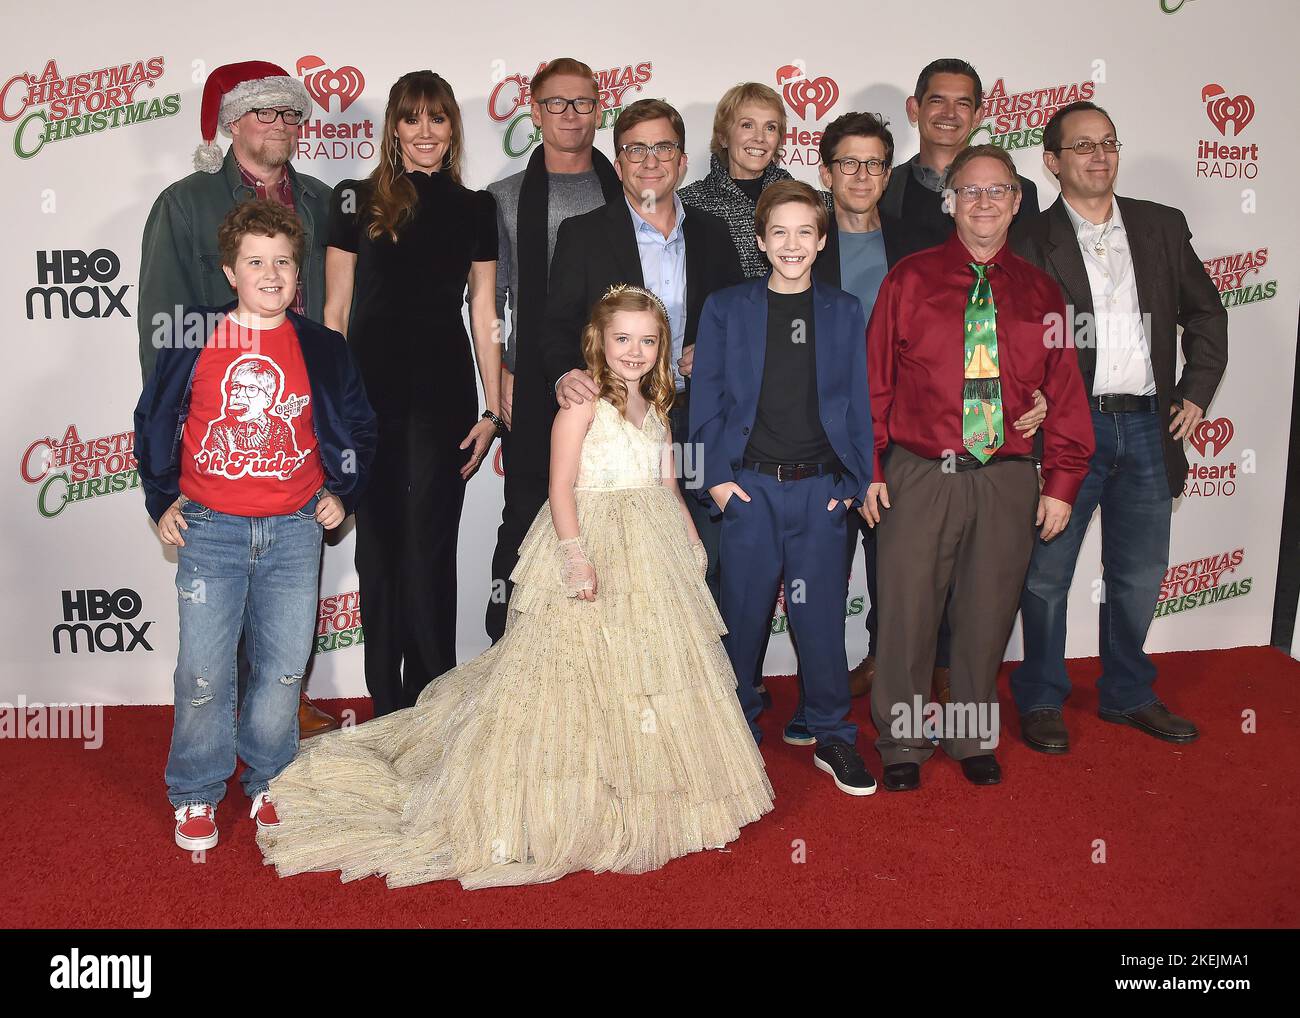 Los Angeles, USA. 13th Nov, 2022. Nick Schenk (Executive Producer), Davis Murphy, Erinn Hayes, Zach Ward, Julianna Layne, Peter Billingsley, Julie Hagerty, River Drosche, RD Robb, Clay Katis (Director), Scott Schwartz and Ian Petrella walking the red carpet at the Warner Brothers and HBO Max Special Outdoor Screening of “A Christmas Story Christmas” at The Autry Museum at Griffith Park in Los Angeles, CA on November 12, 2022. (Photo By Scott Kirkland/Sipa USA) Credit: Sipa USA/Alamy Live News Stock Photo